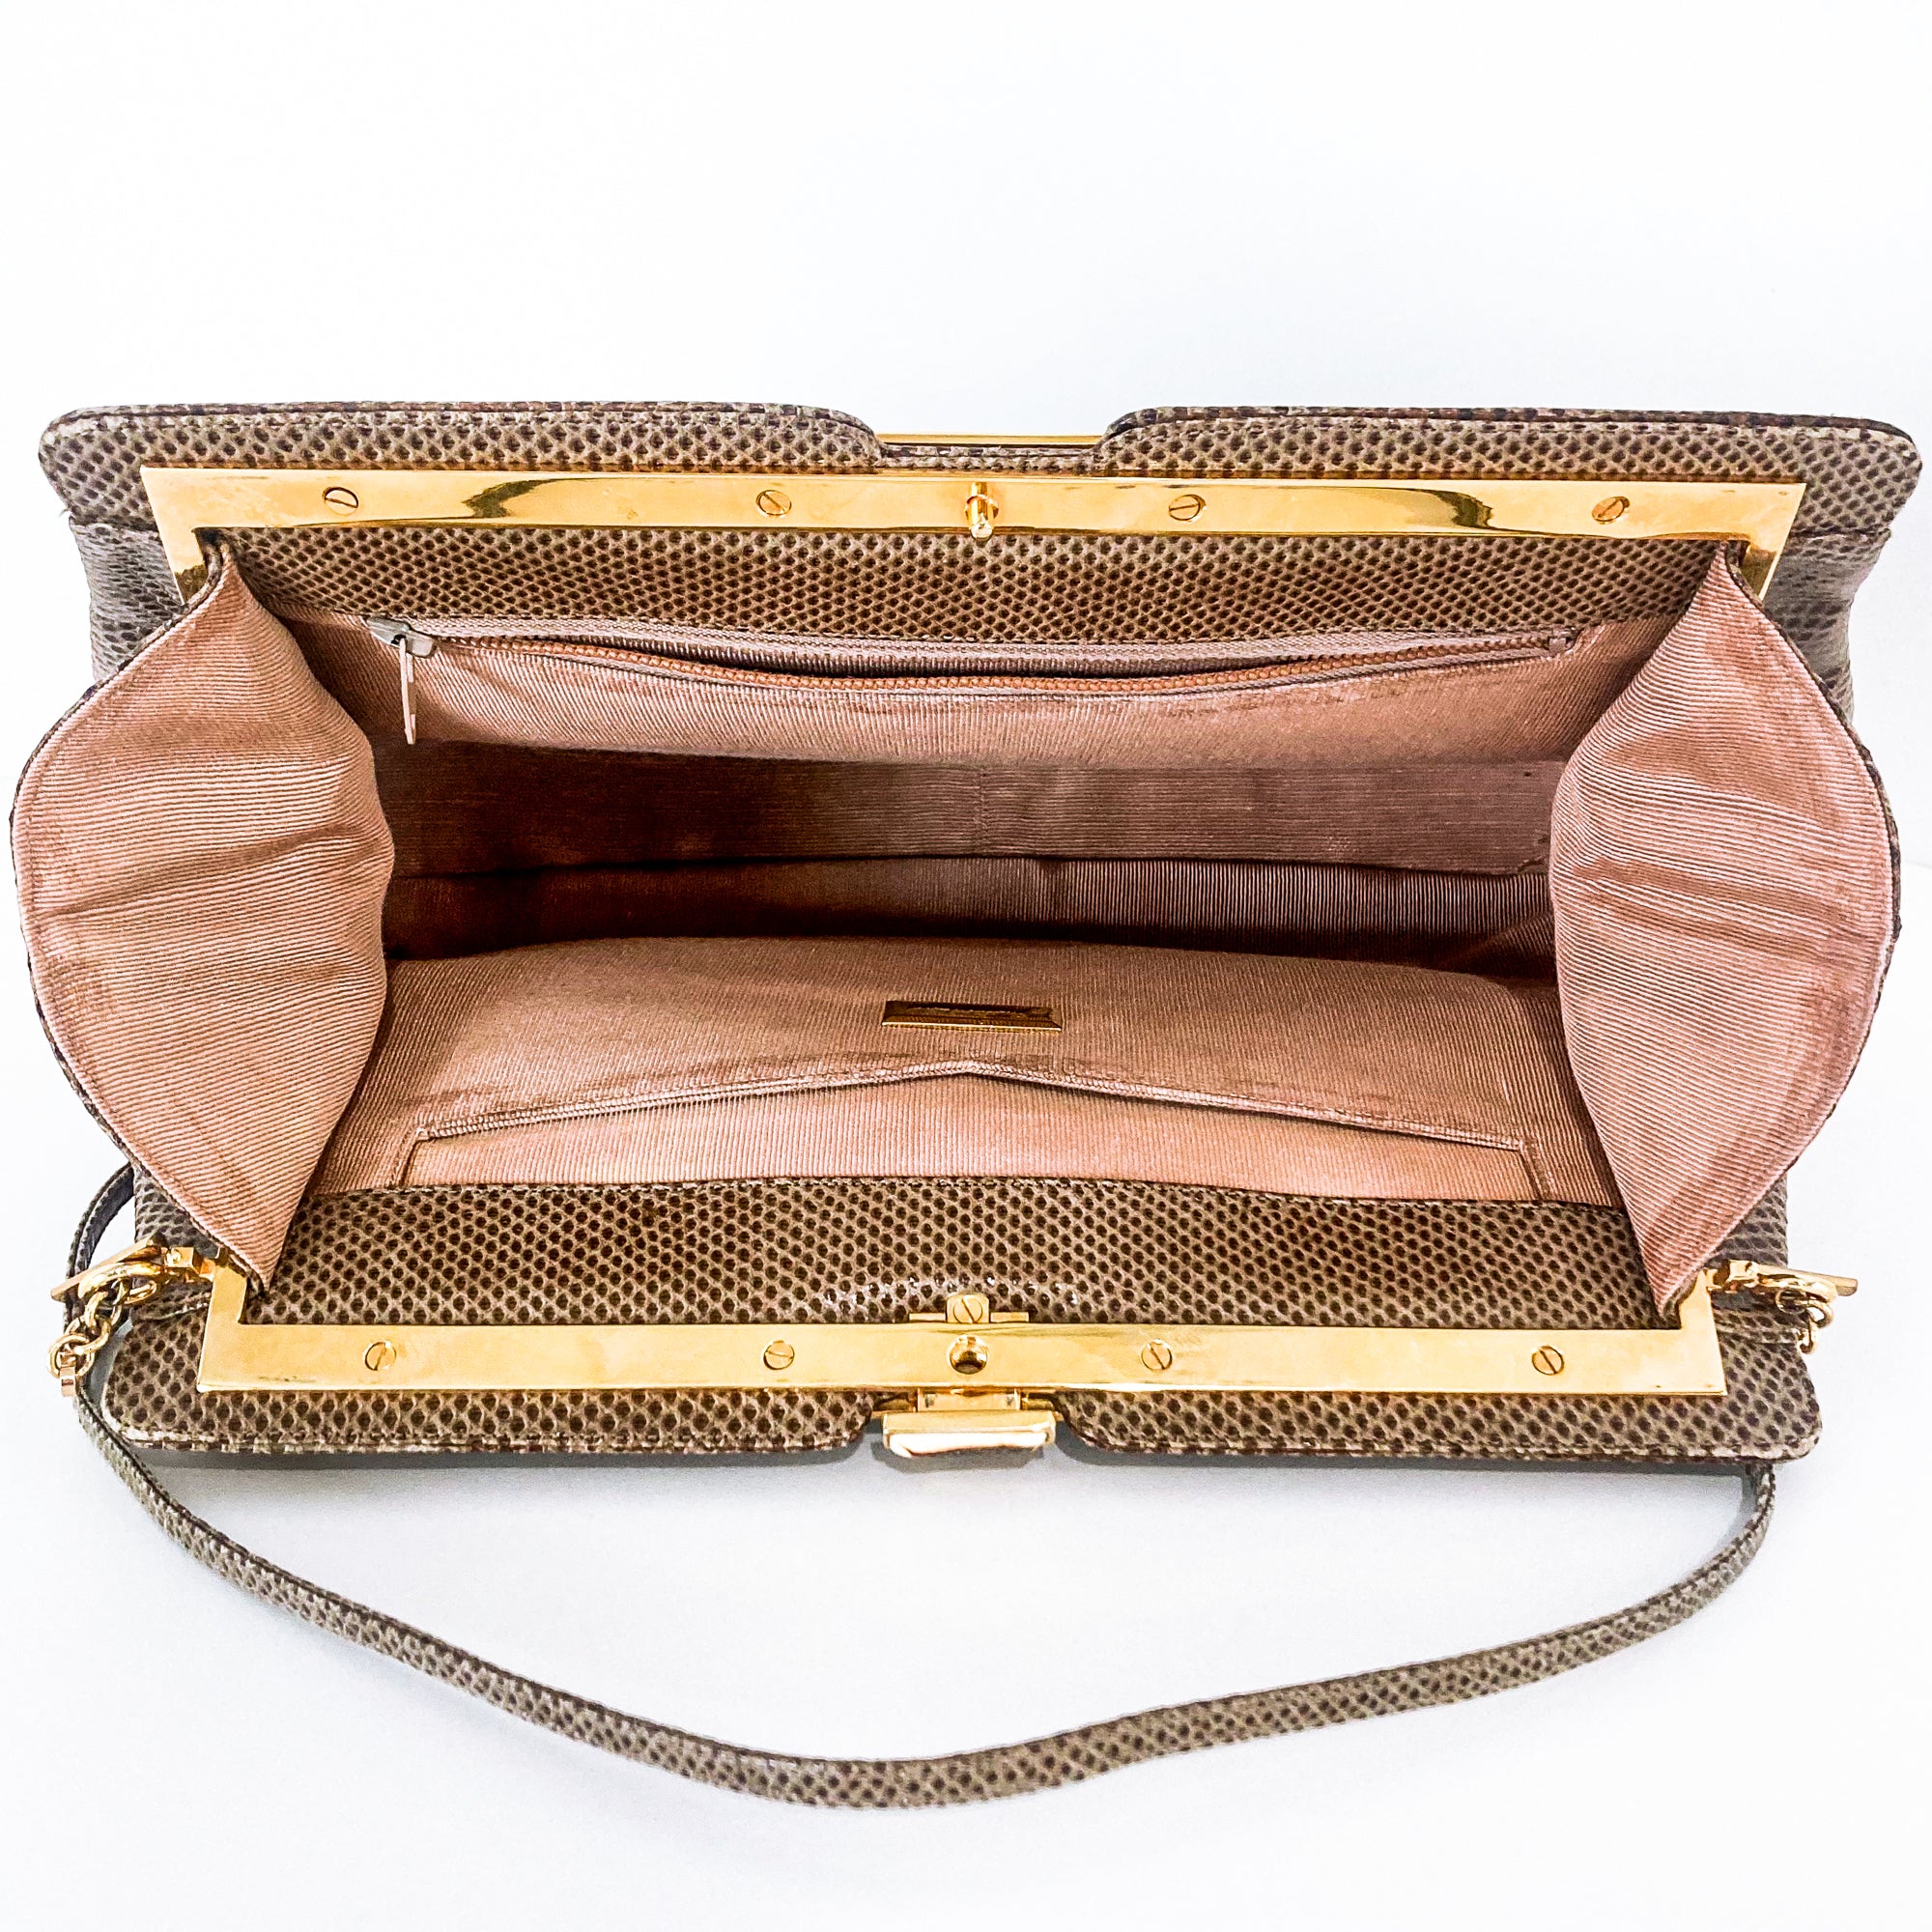 Vintage Judith Leiber Clutch Purses and Handbags - HubPages